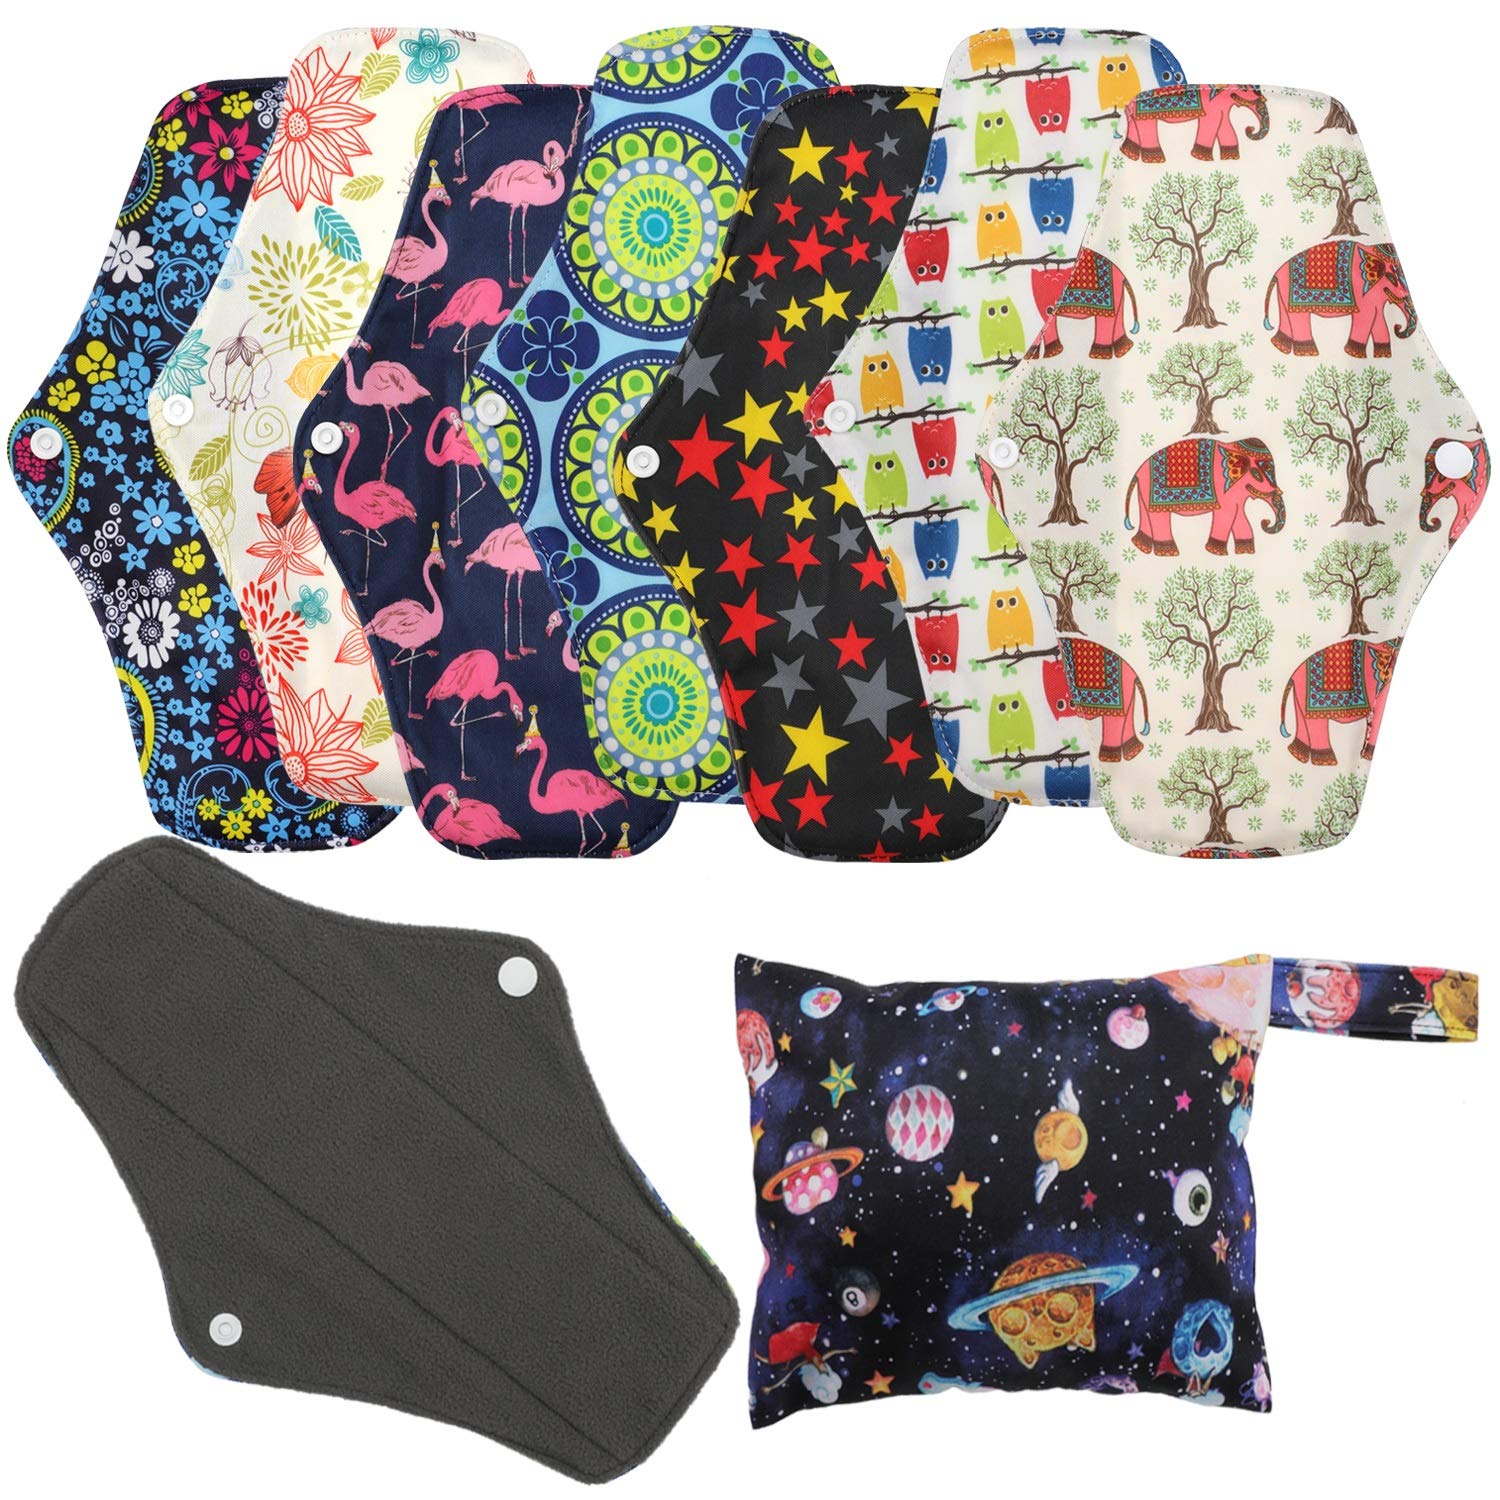 Reusable Menstrual Pads (7 in 1, 10in*7in), PHOGARY Bamboo Cloth Pads for  Heavy Flow with Wet Bag, Large Sanitary Pads Set with Wings for Women,  Washable Overnight Cloth Panty Liners Period Pads